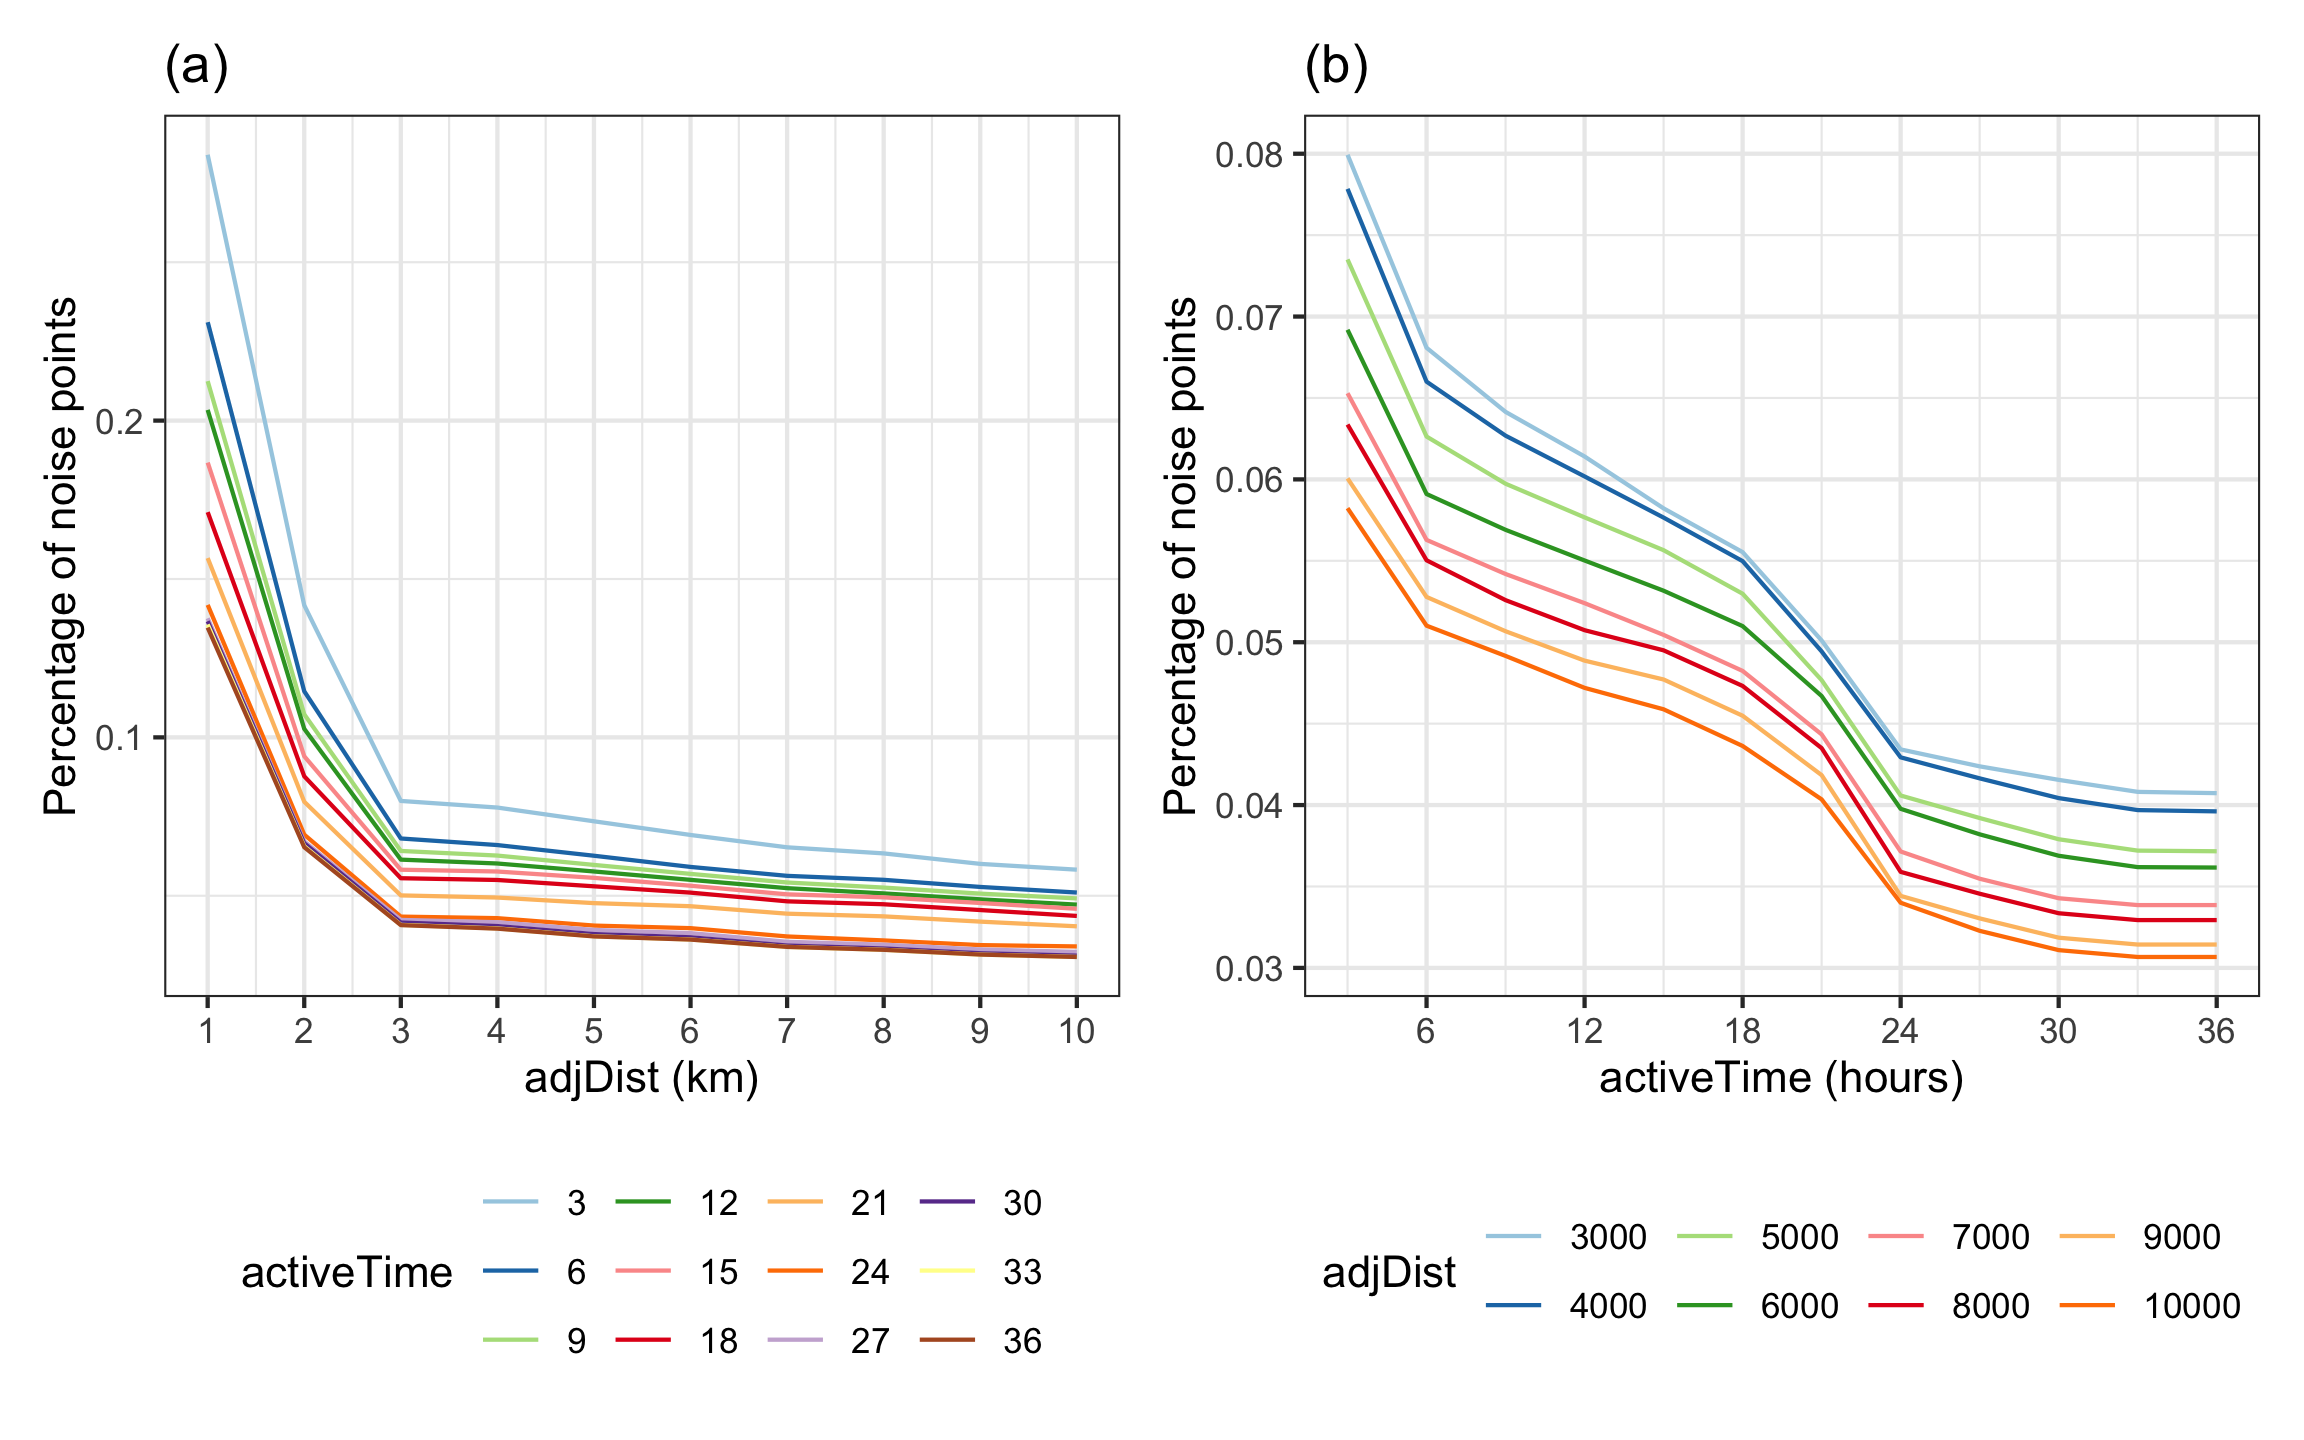 Parameter tuning plots, where the best choice of parameter is at a large drop in the percentage of noise points. Here, these are at $AdjDist = 3000$ and $activeTime = 24$. 